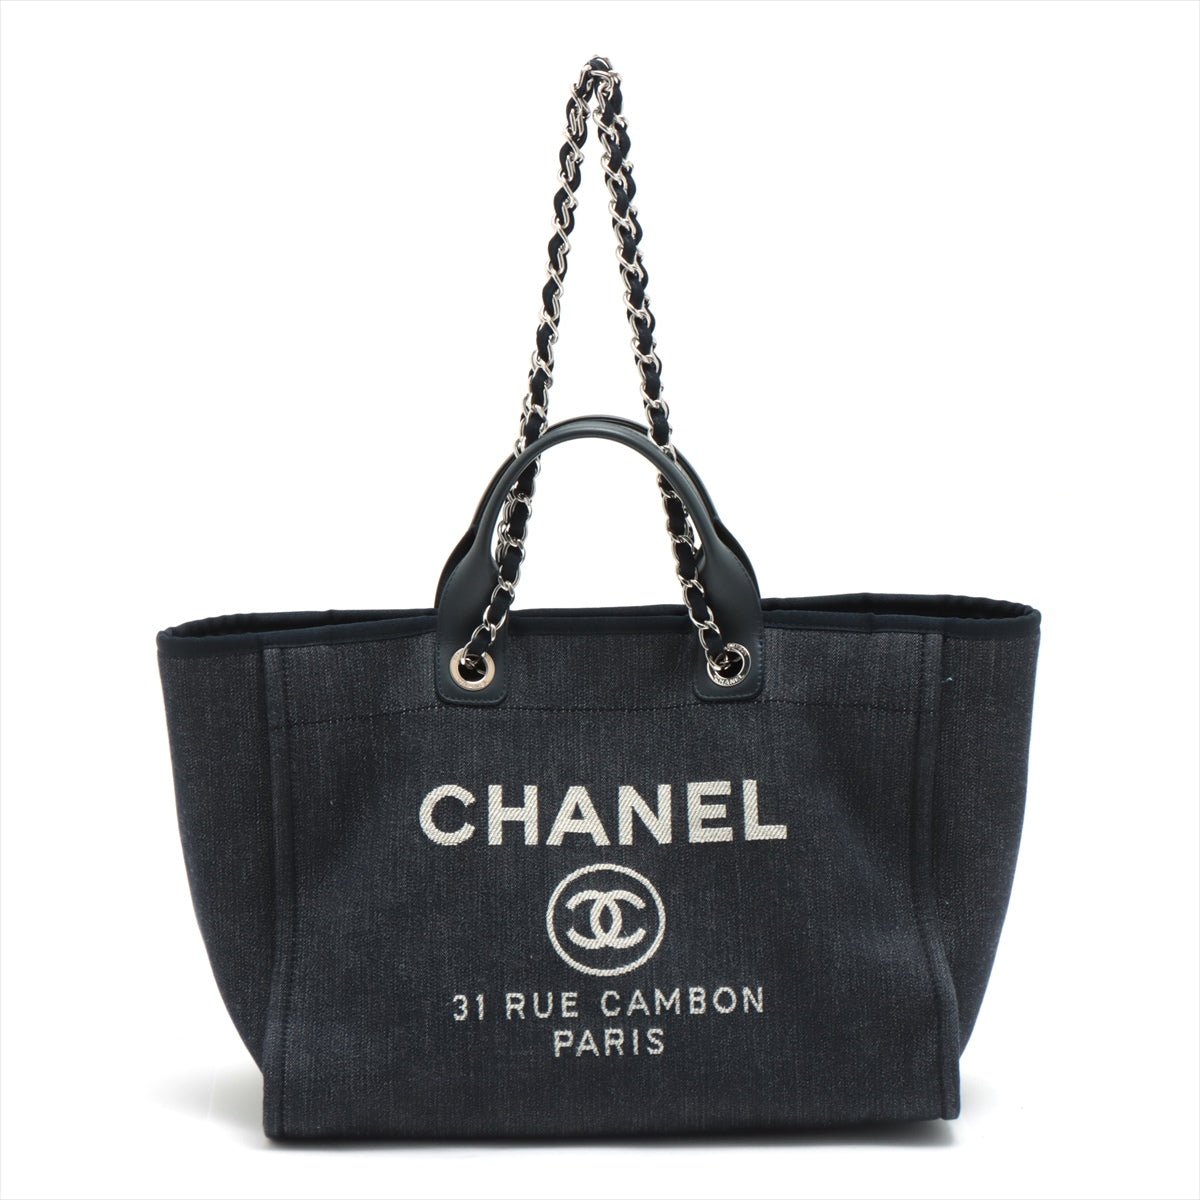 CHANEL, Bags, Auth Chanel New Travel Line Tote Gm Beige White Jacquard  Leather Tote Bag